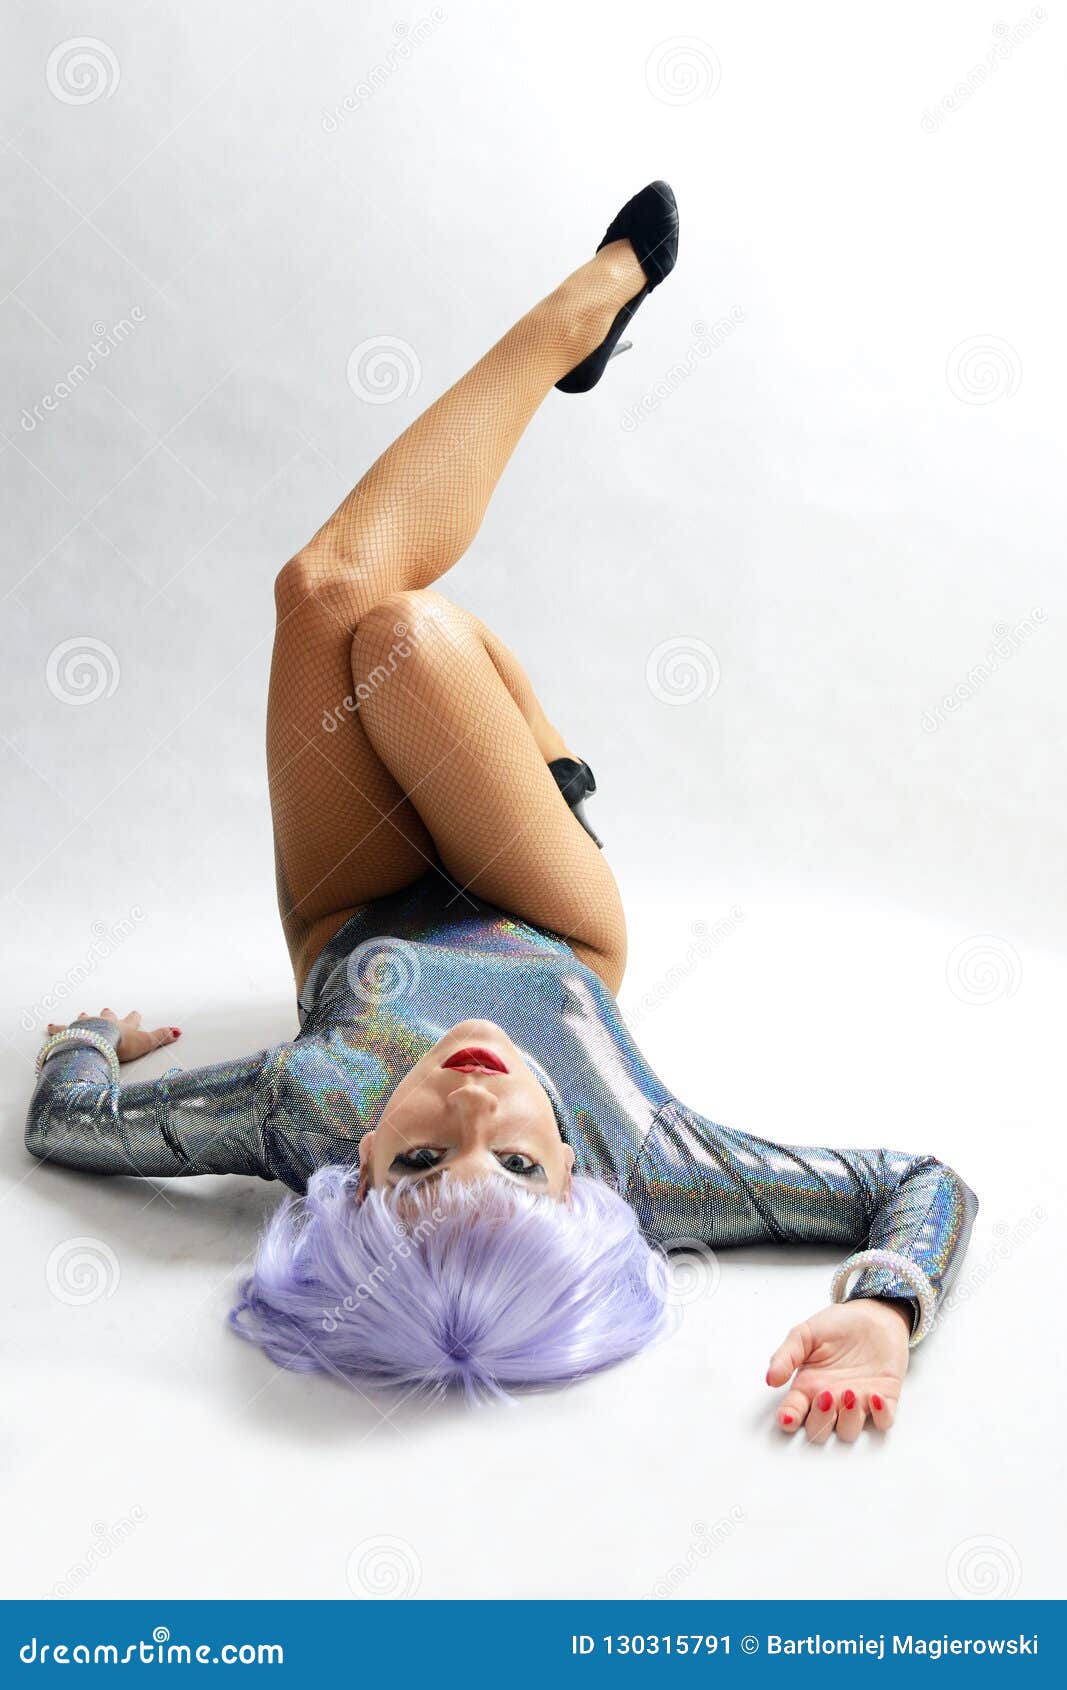 Girl In Silver Costume Laying On The Floor Stock Image Image Of Metal Dancer